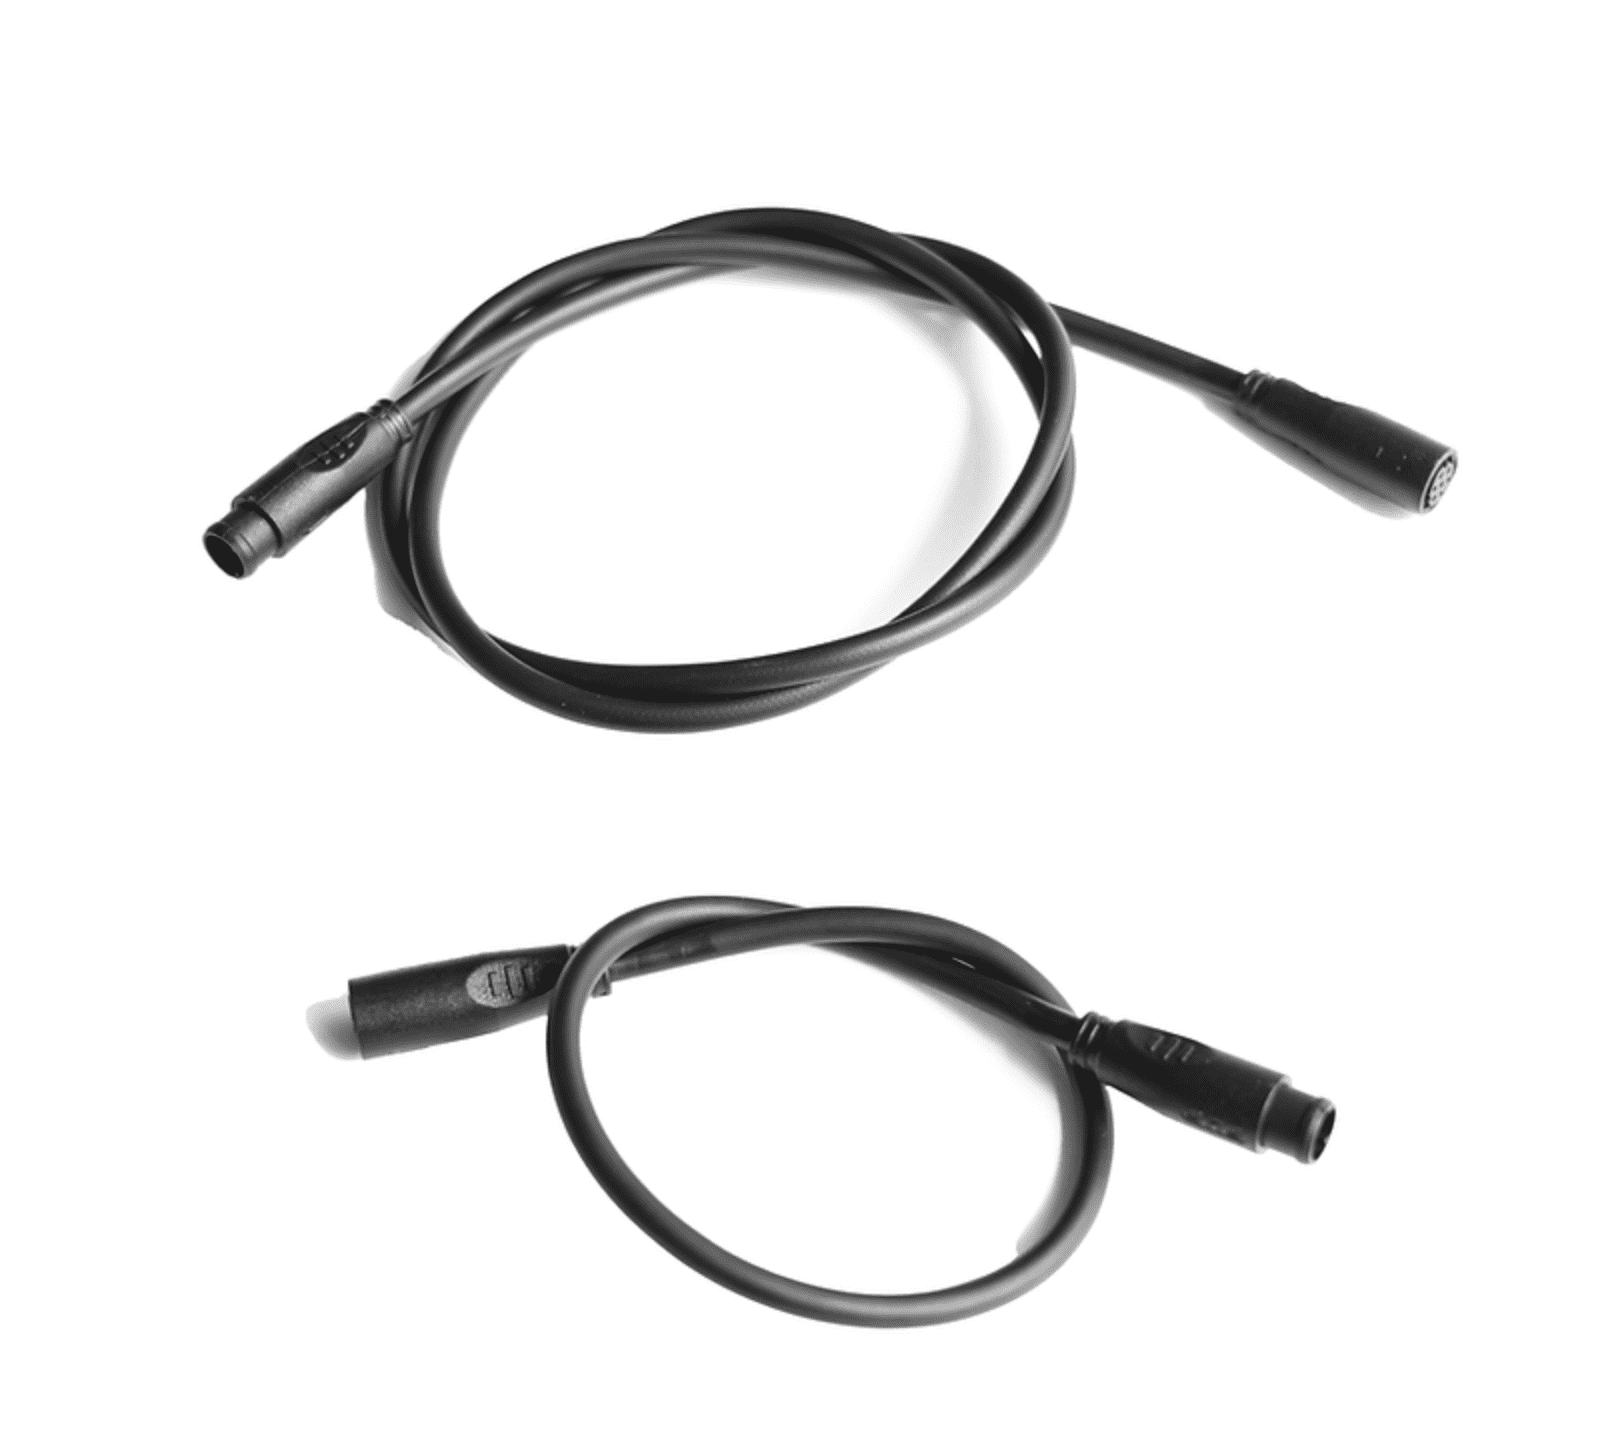 Two different types of cables are shown.